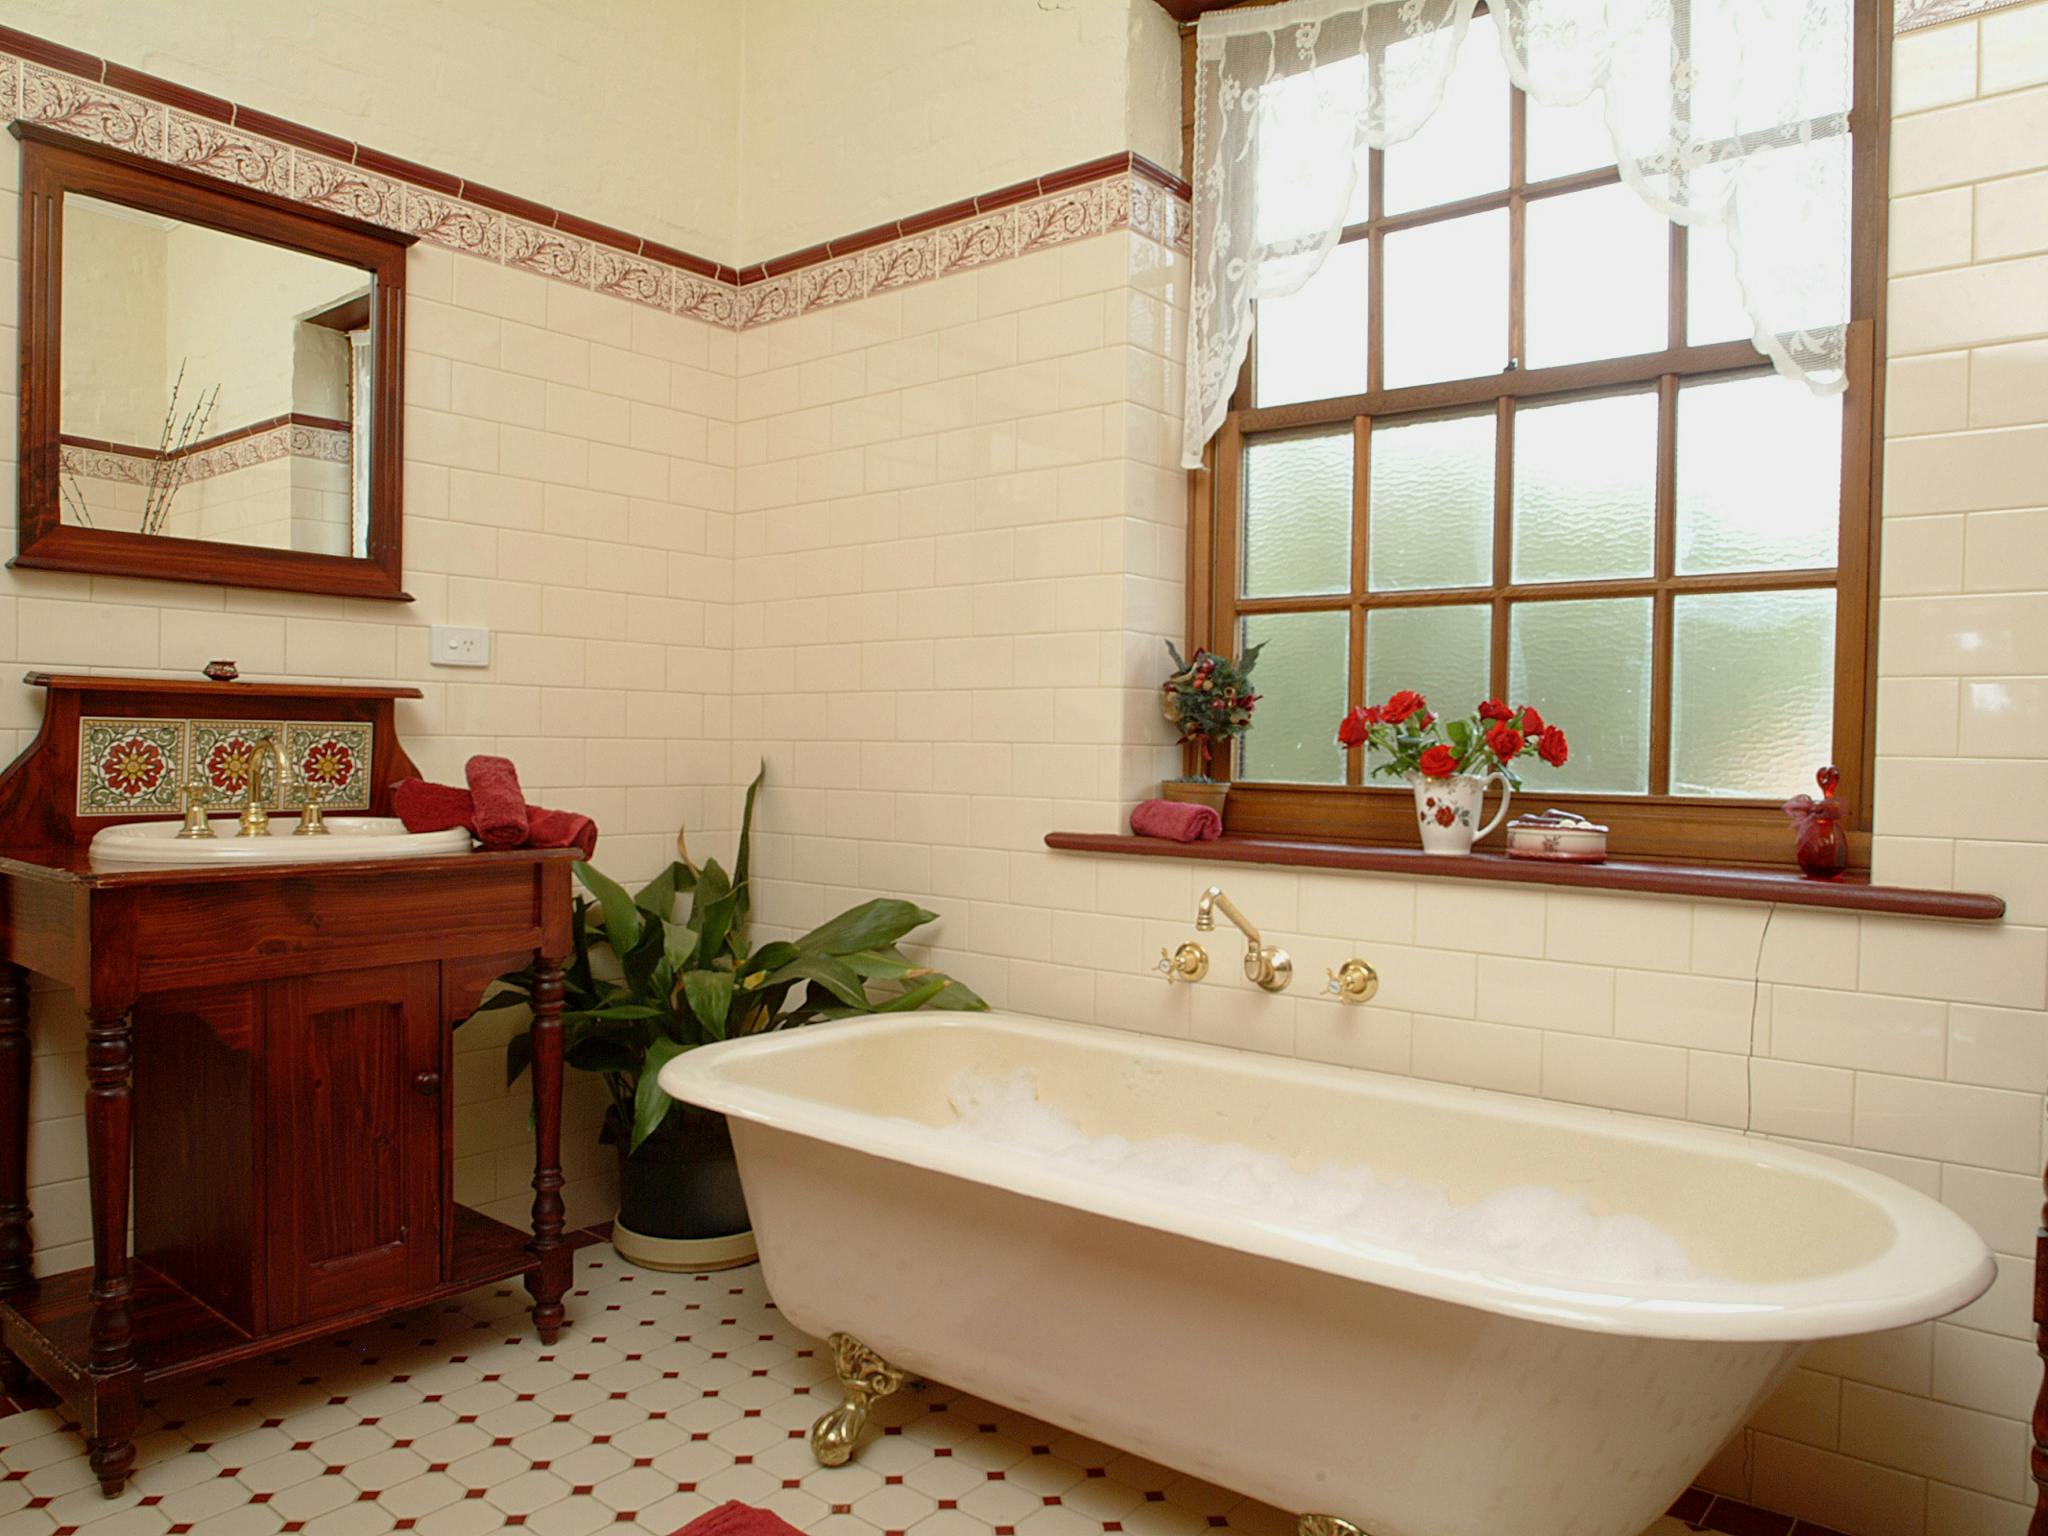 Soak in the large claw footed bath or enjoy the separate  rain water shower.